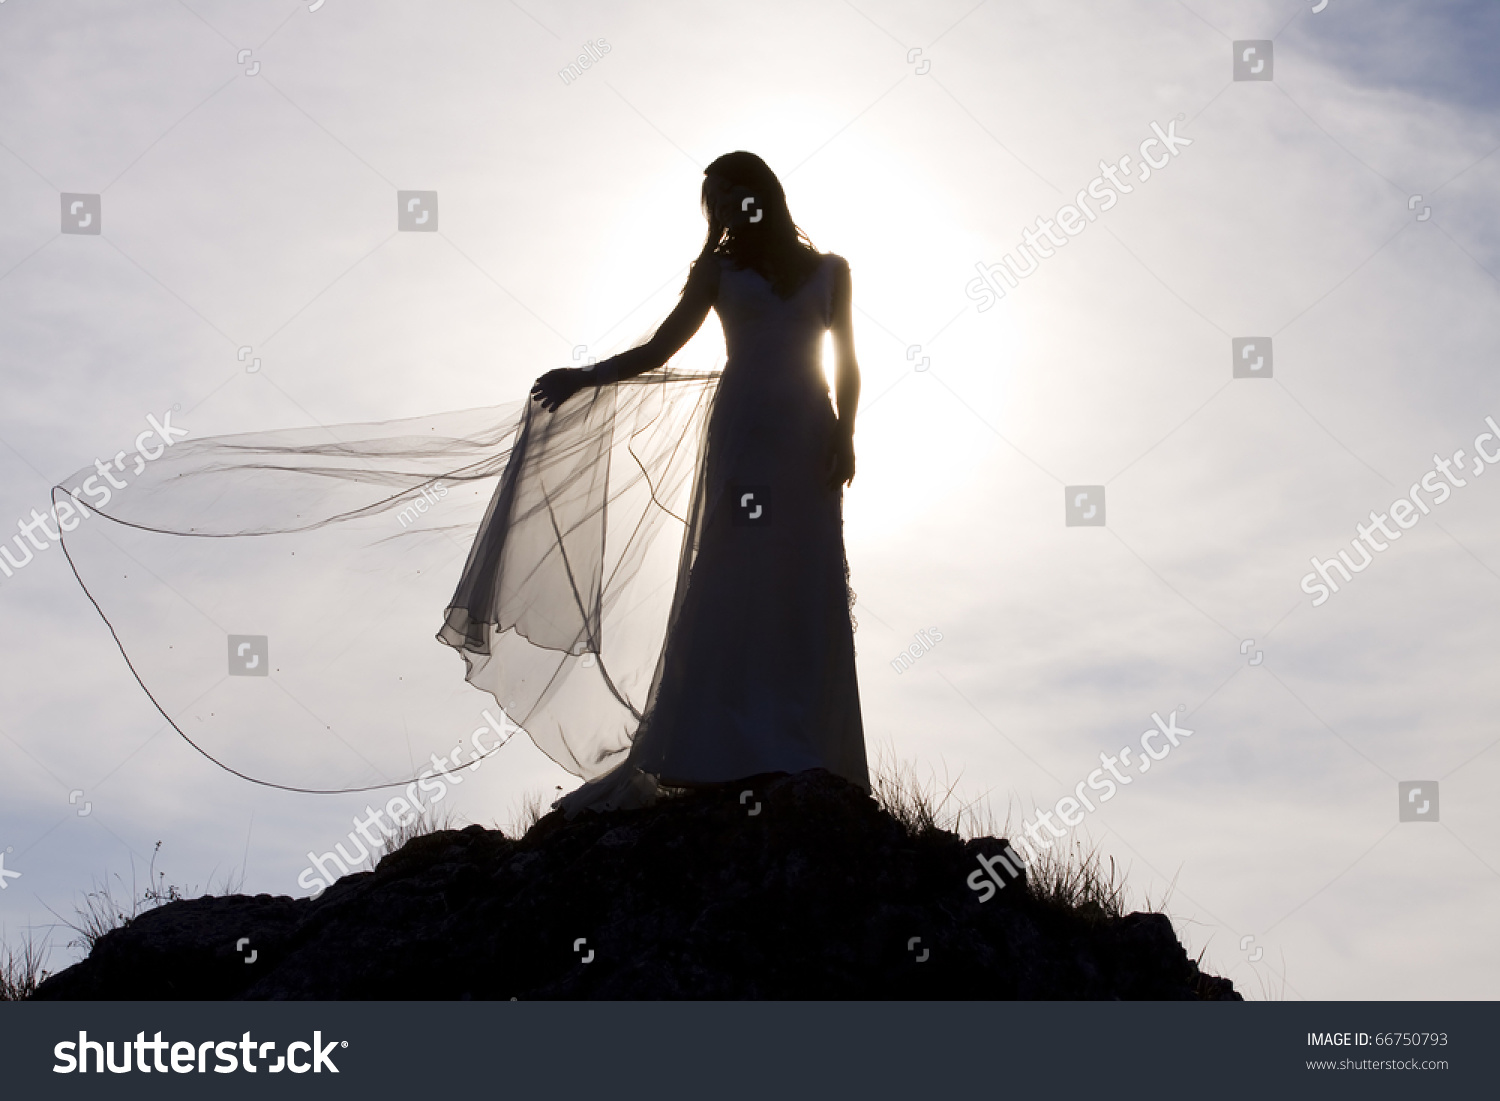 Silhouette Of Romantic Woman On Field With Veil In The Wind Stock Photo ...